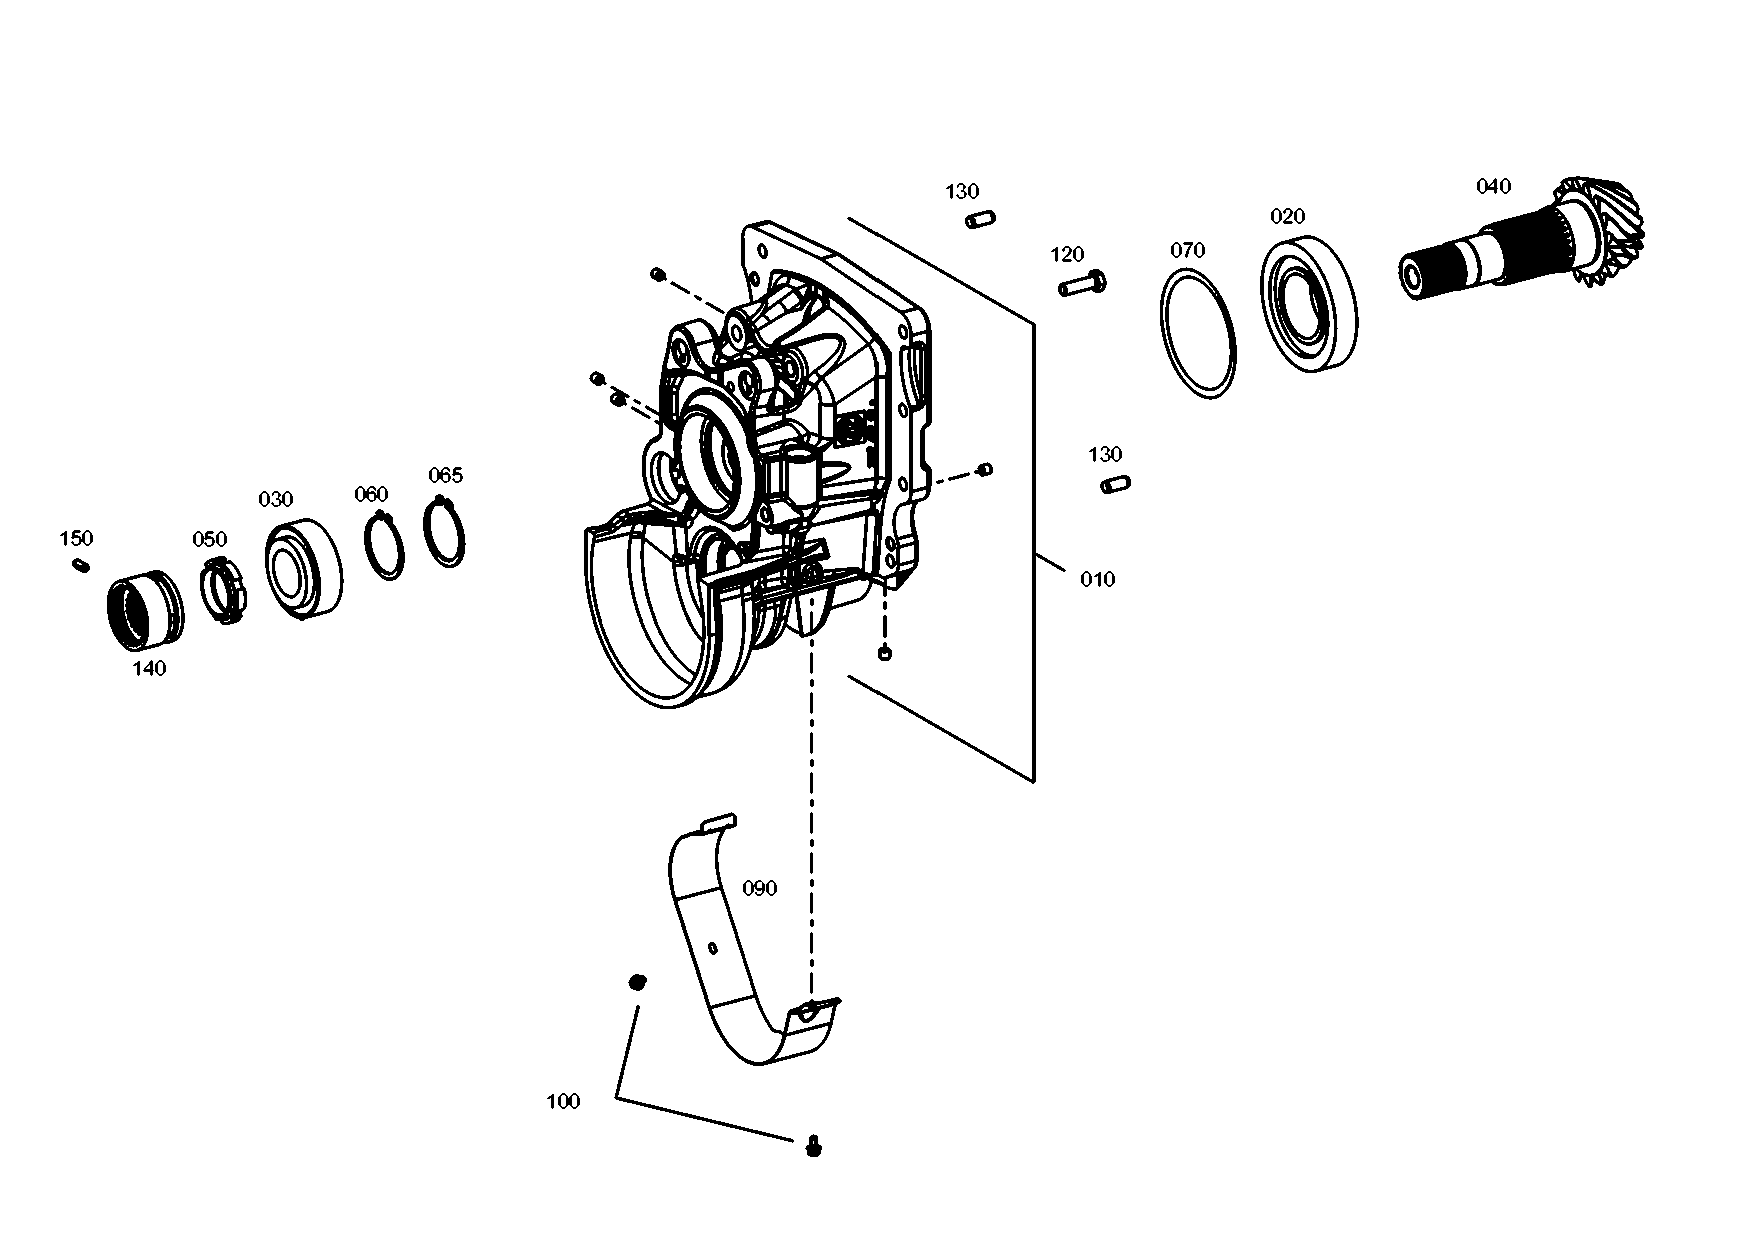 drawing for TITAN GMBH 199118250359 - ADJUSTMENT PLATE (figure 4)